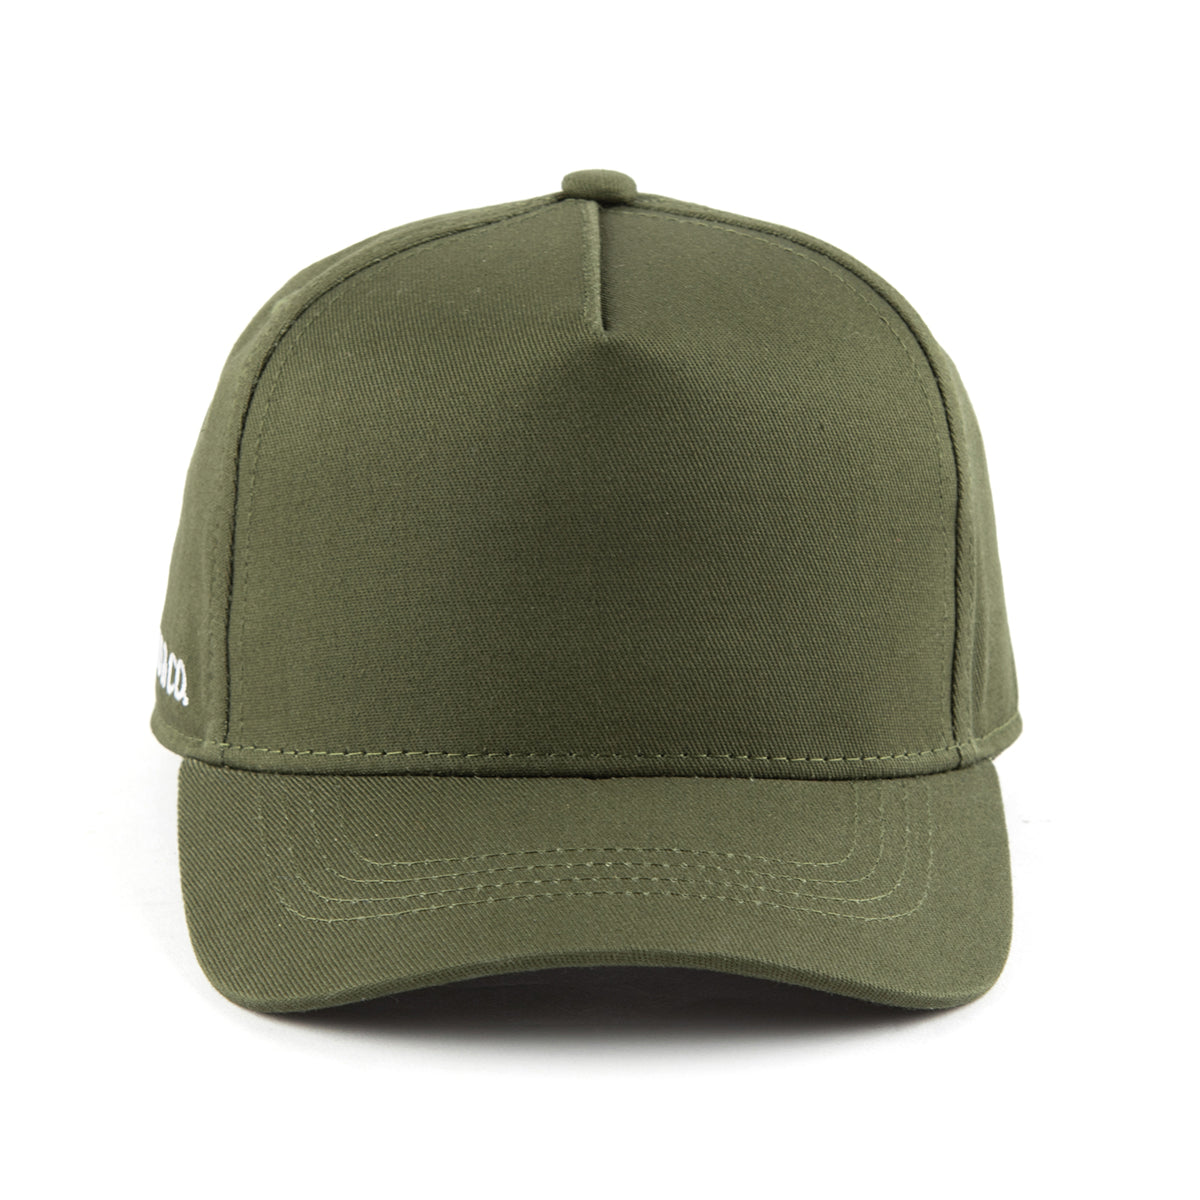 OLIVE BASEBALL CAP: Available in Baby - Adult Sizes - Cubs & Co.